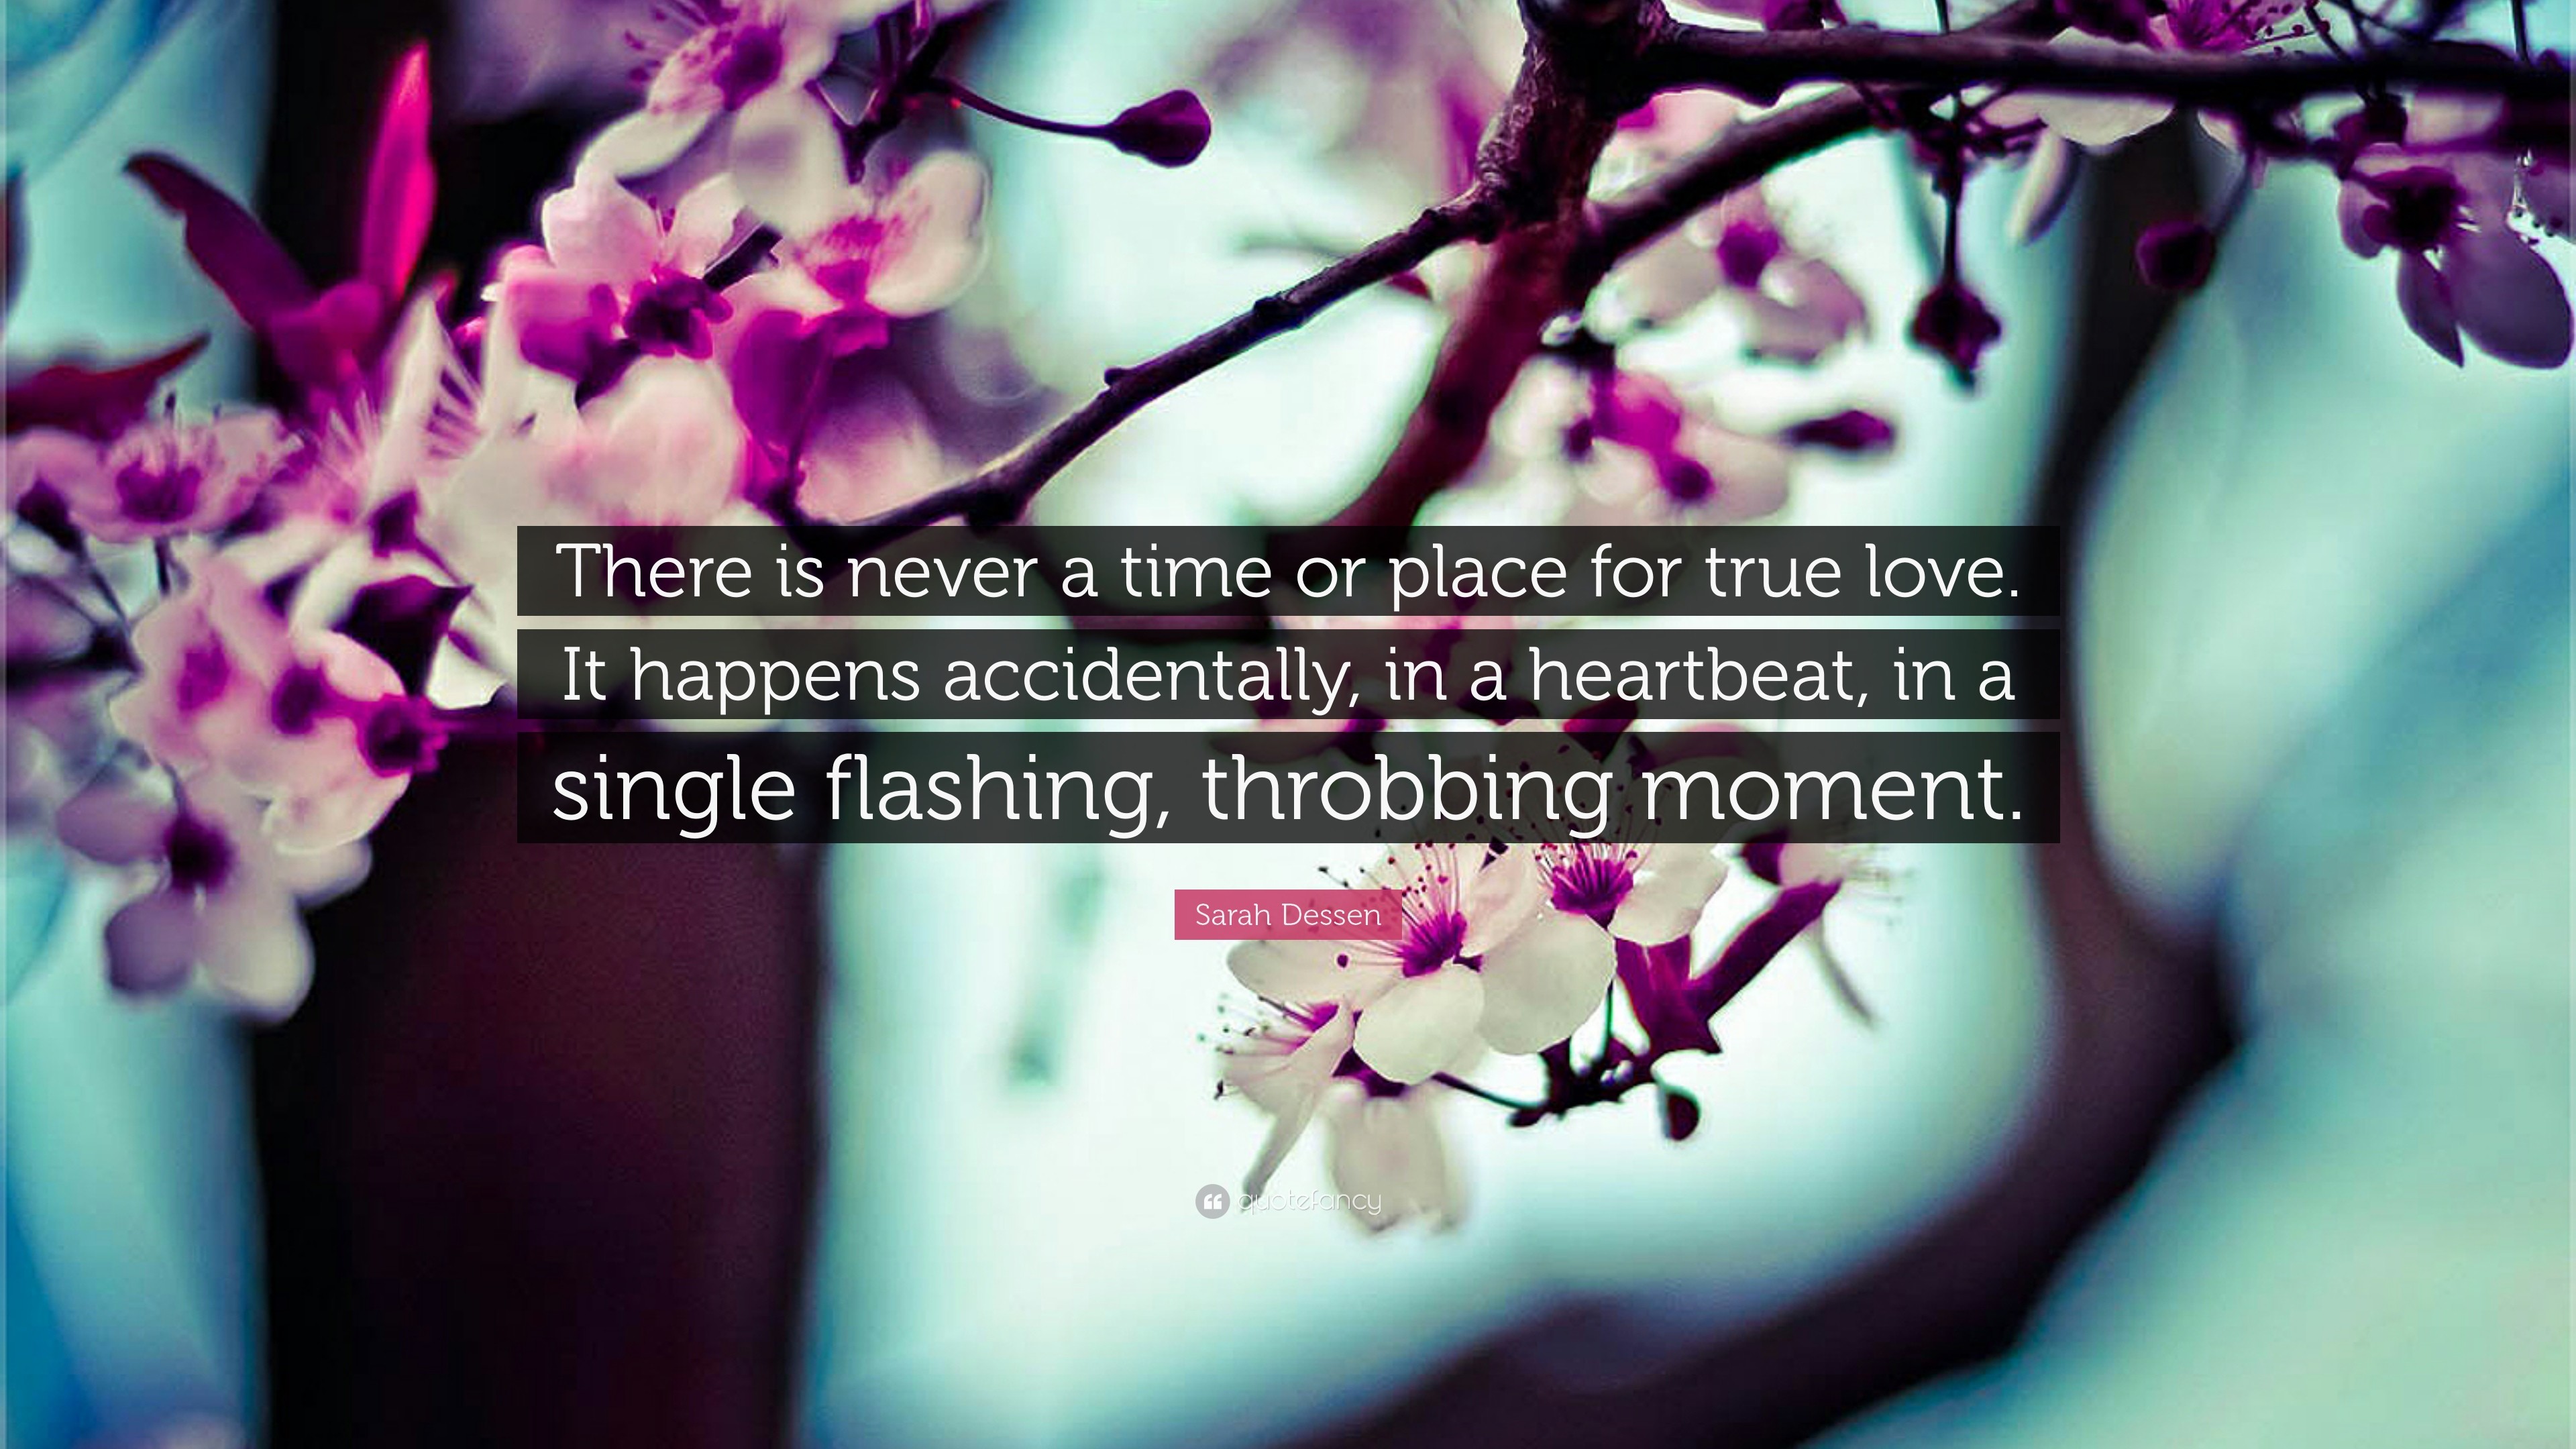 3840x2160 Love Quotes: “There is never a time or place for true love. It